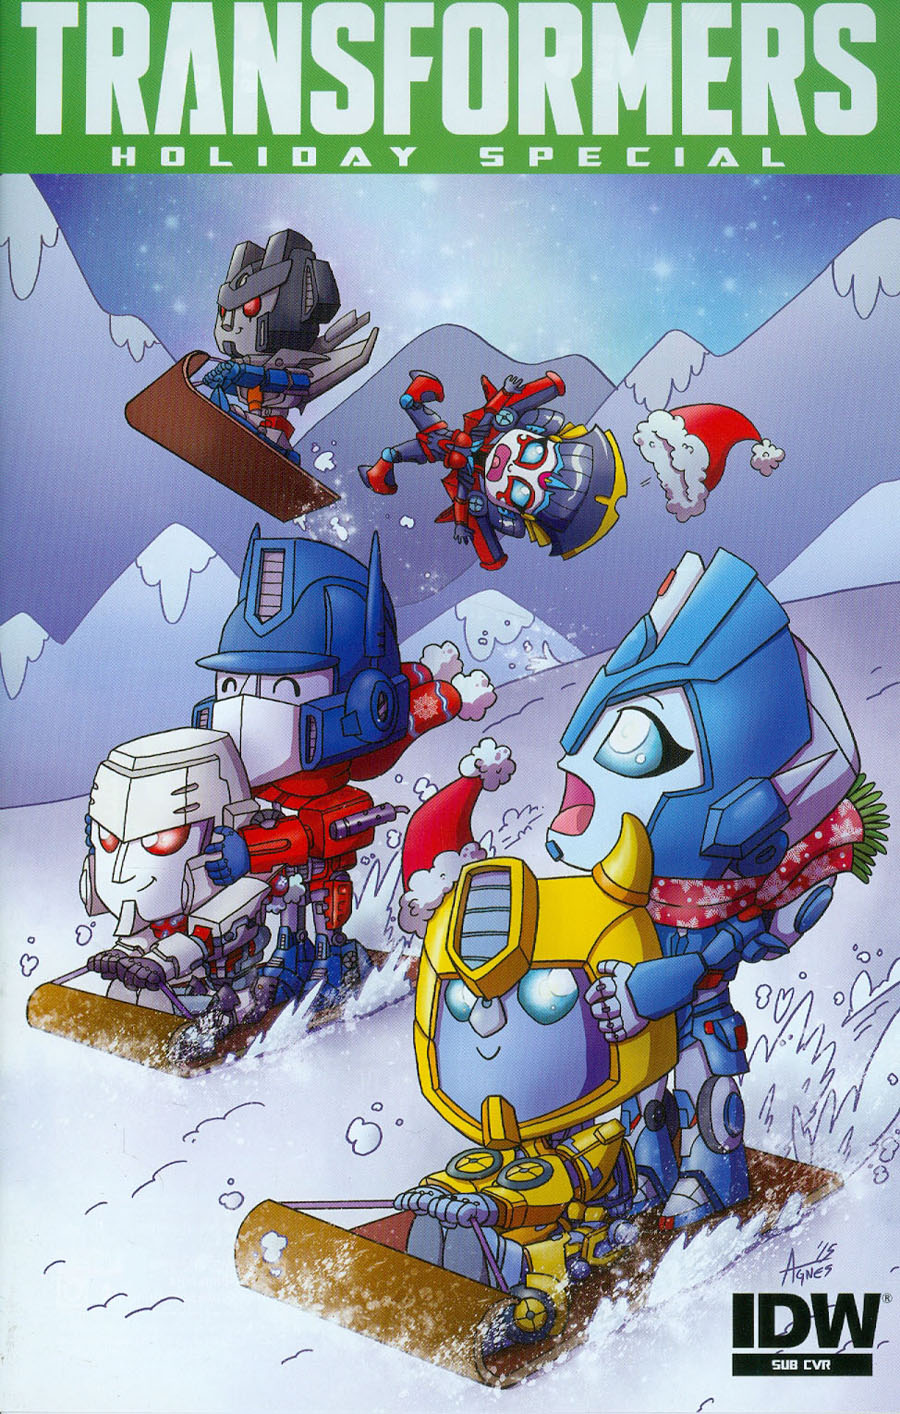 Transformers Holiday Special Cover B Variant Agnes Garbowska Subscription Cover